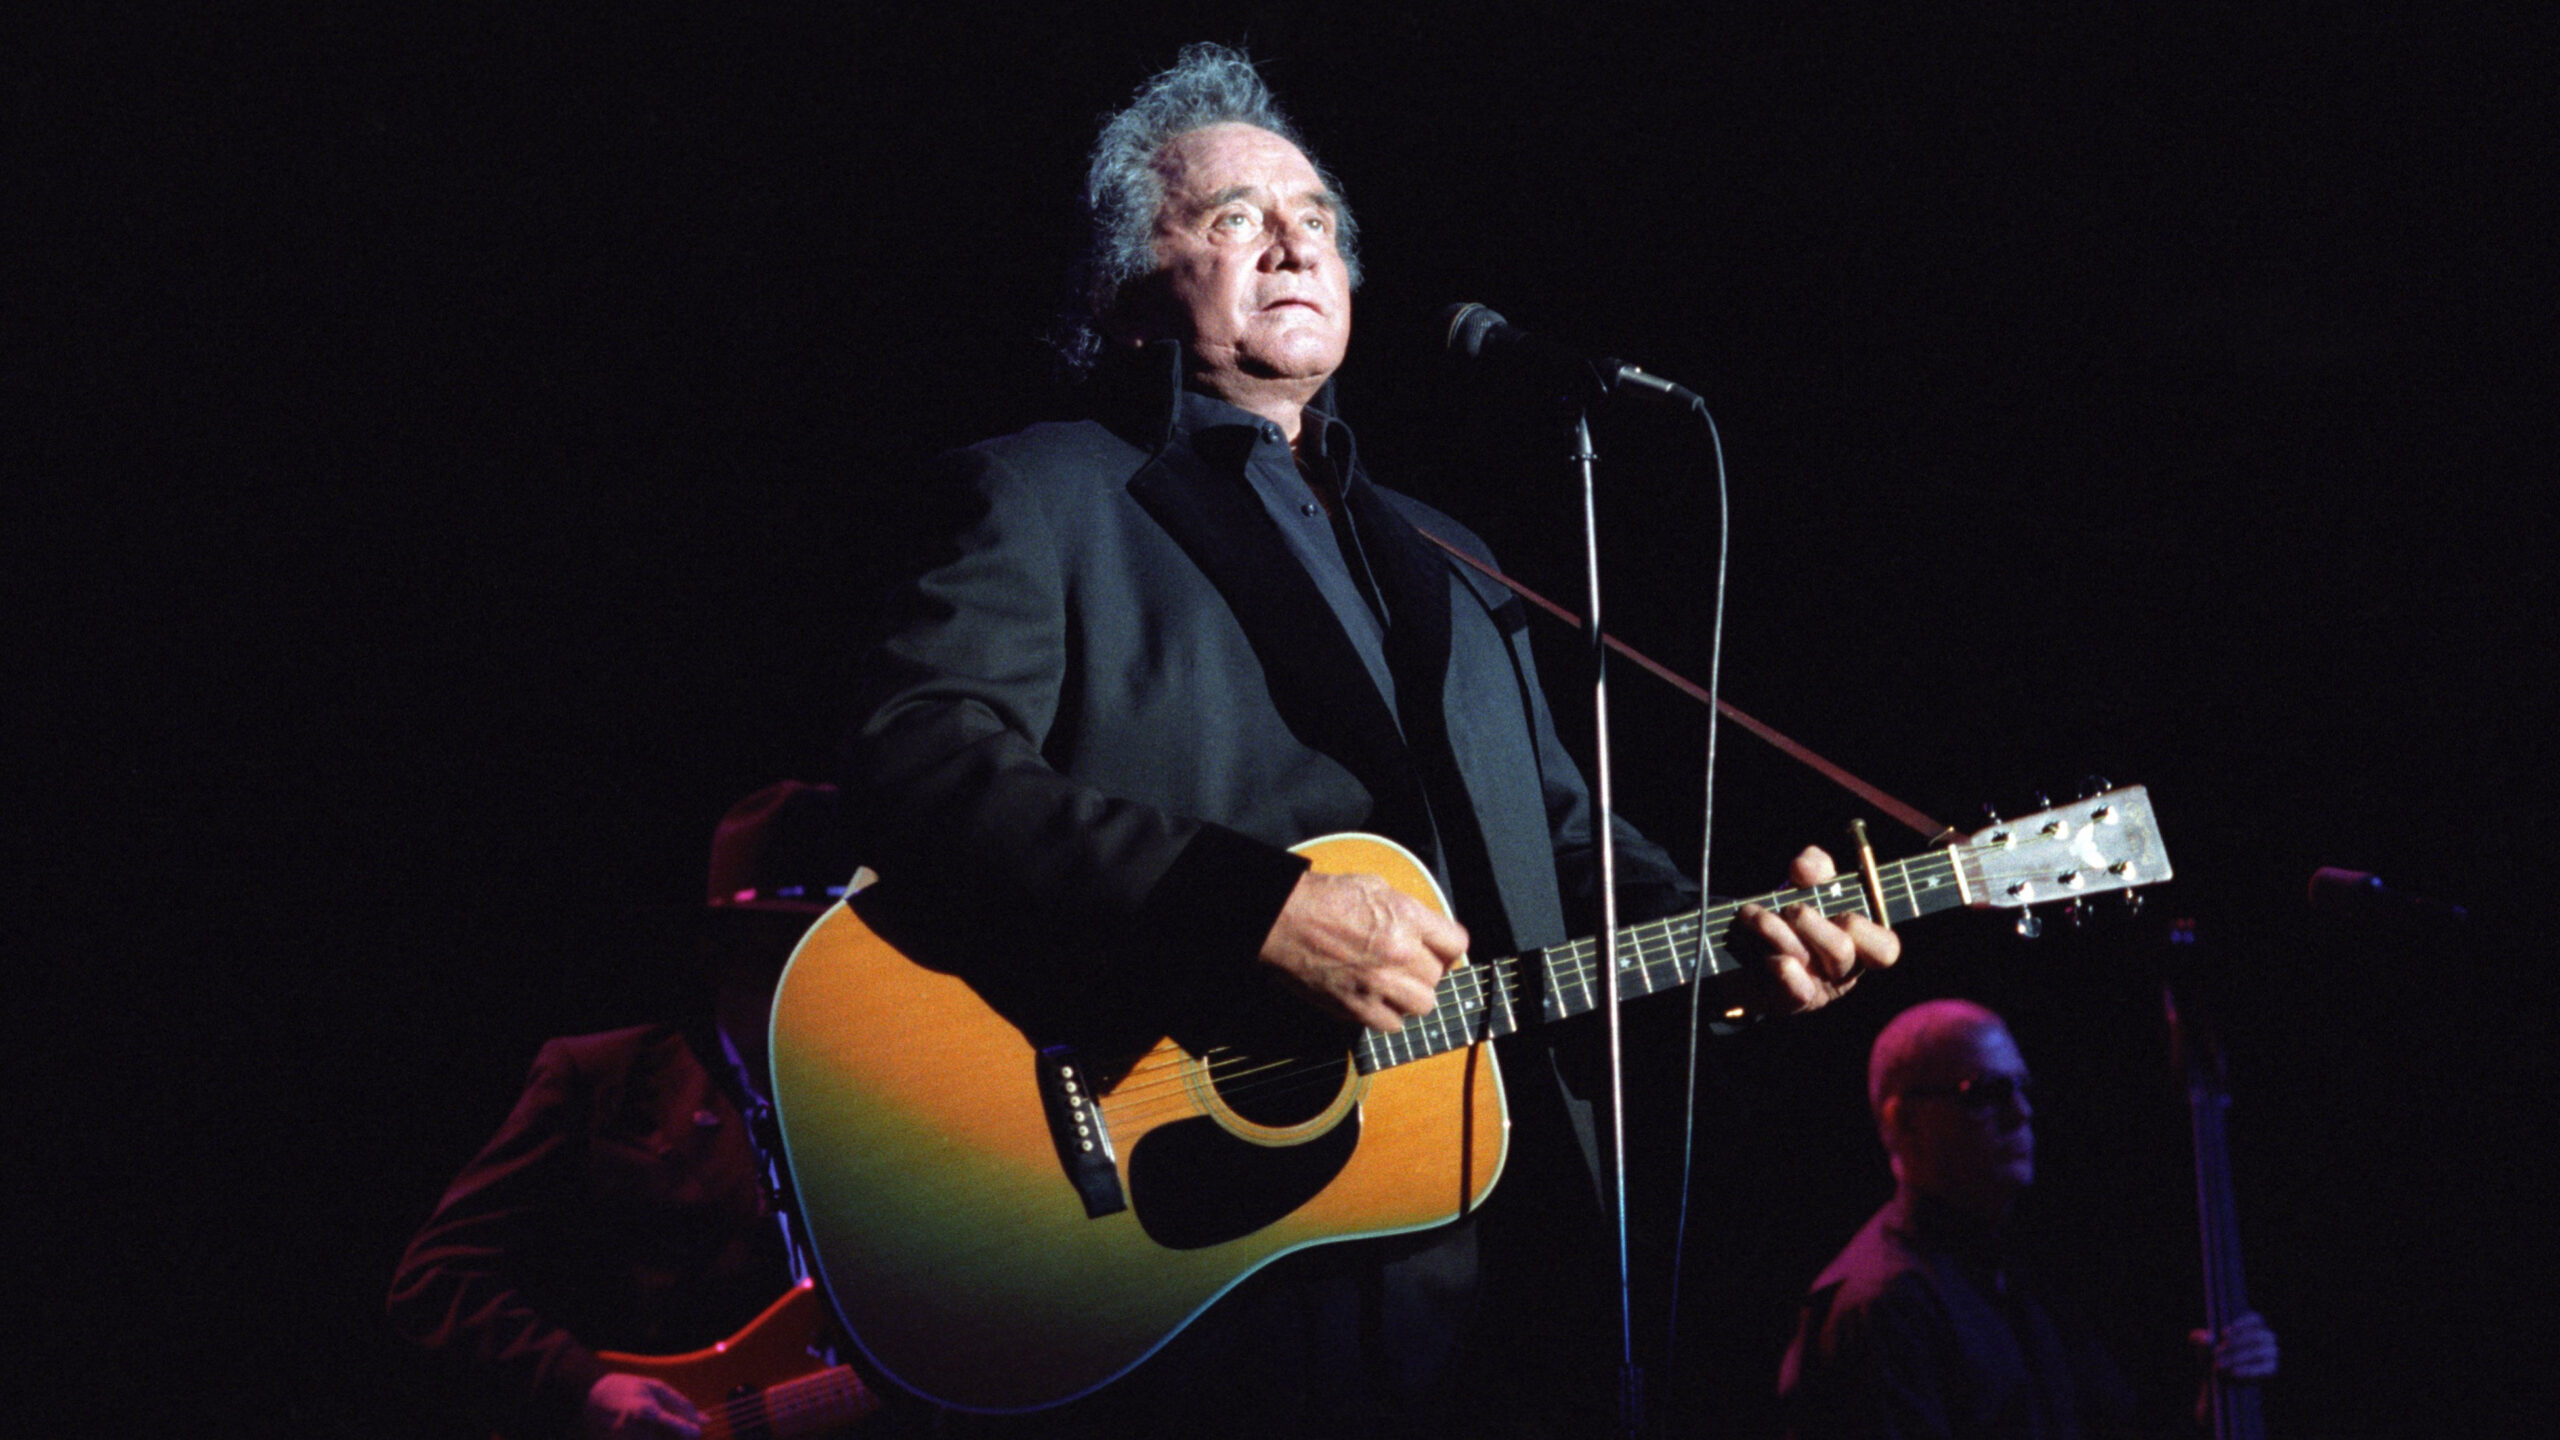 New Johnny Cash Album Featuring Unreleased Tracks Launching This Summer